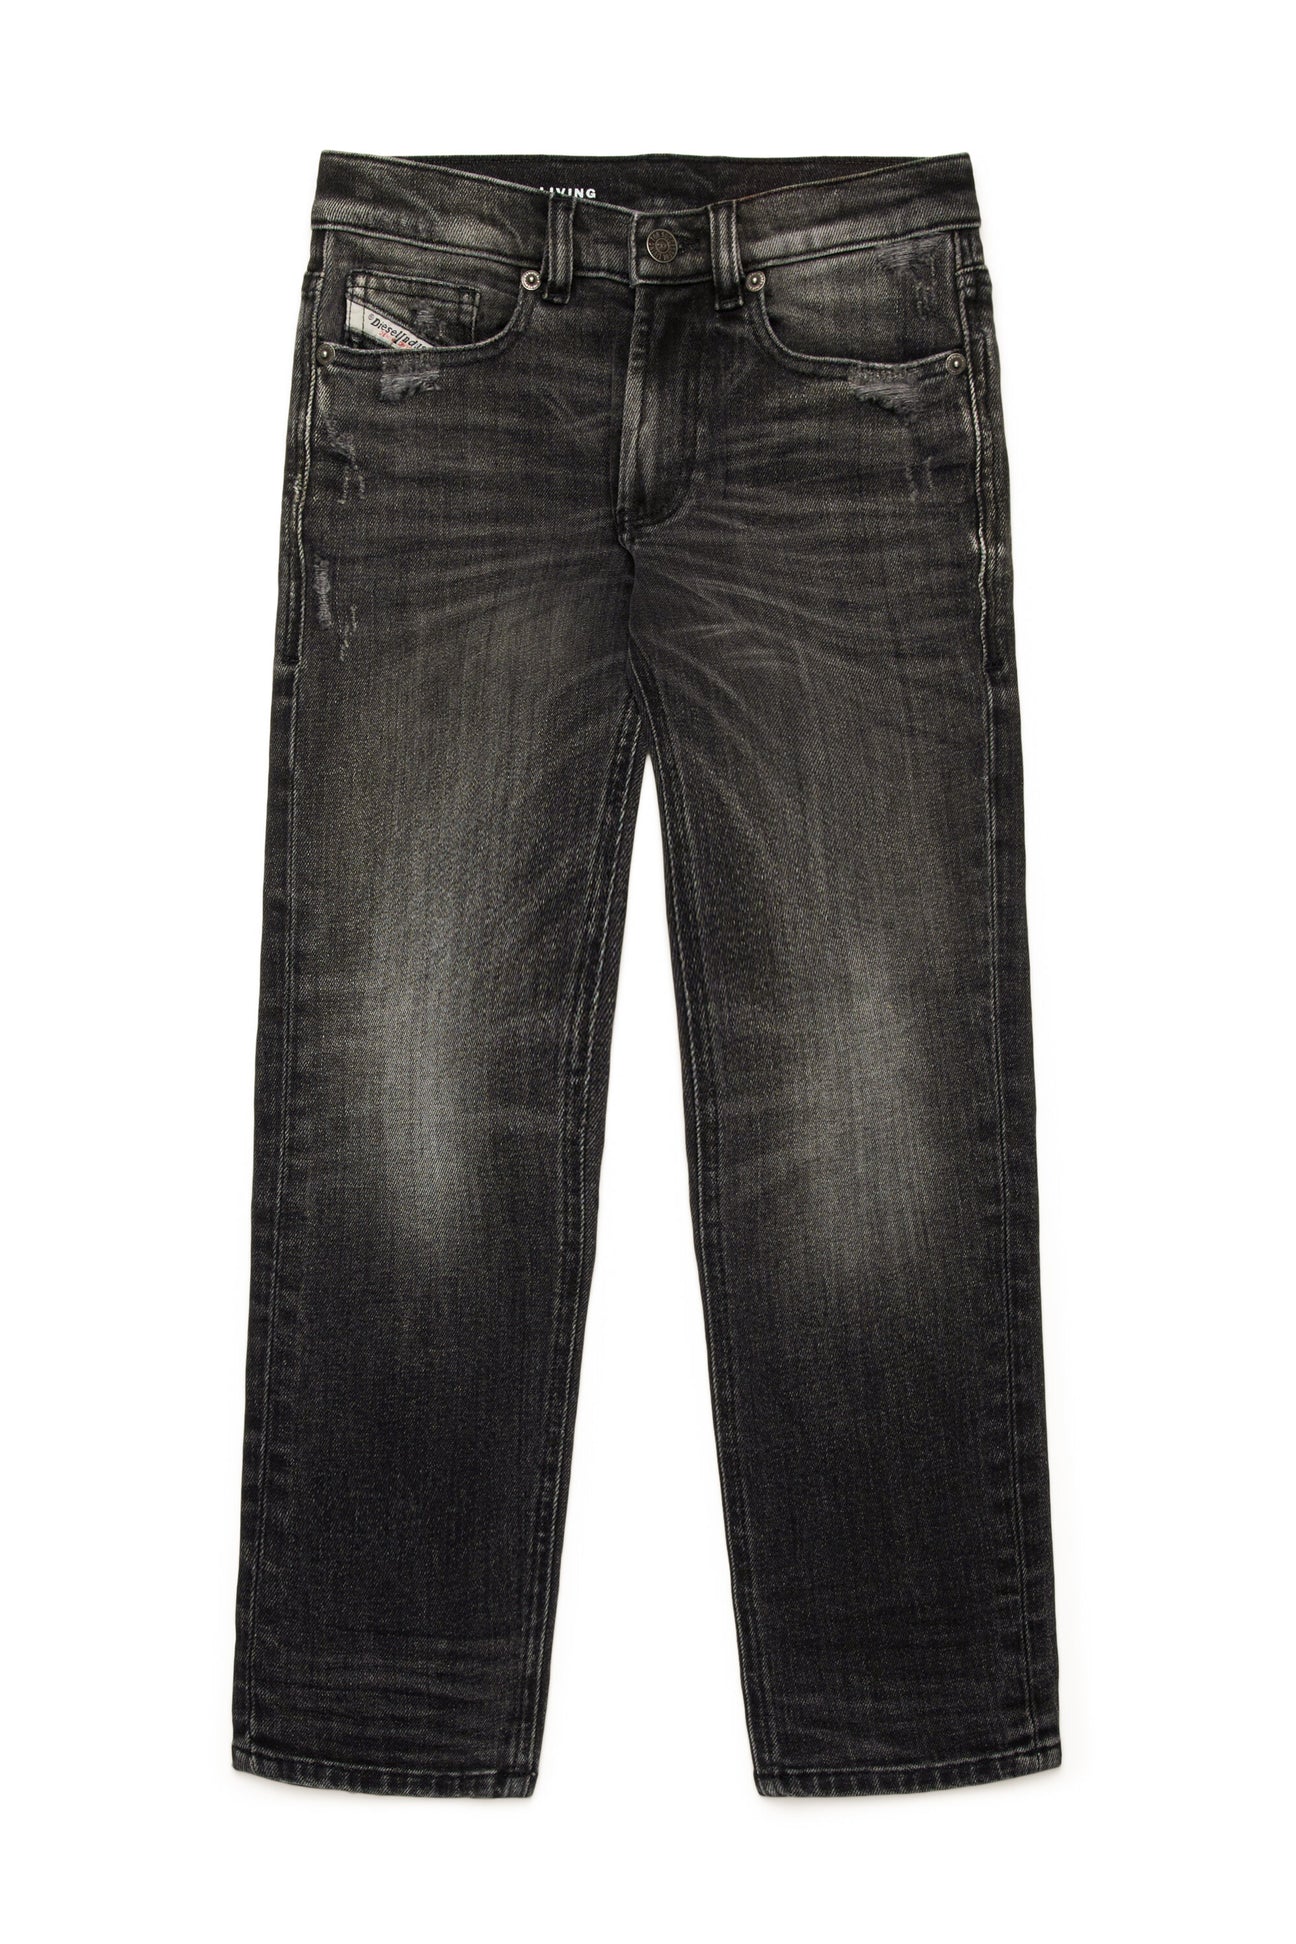 Black straight jeans with abrasions - 2010 Black straight jeans with abrasions - 2010